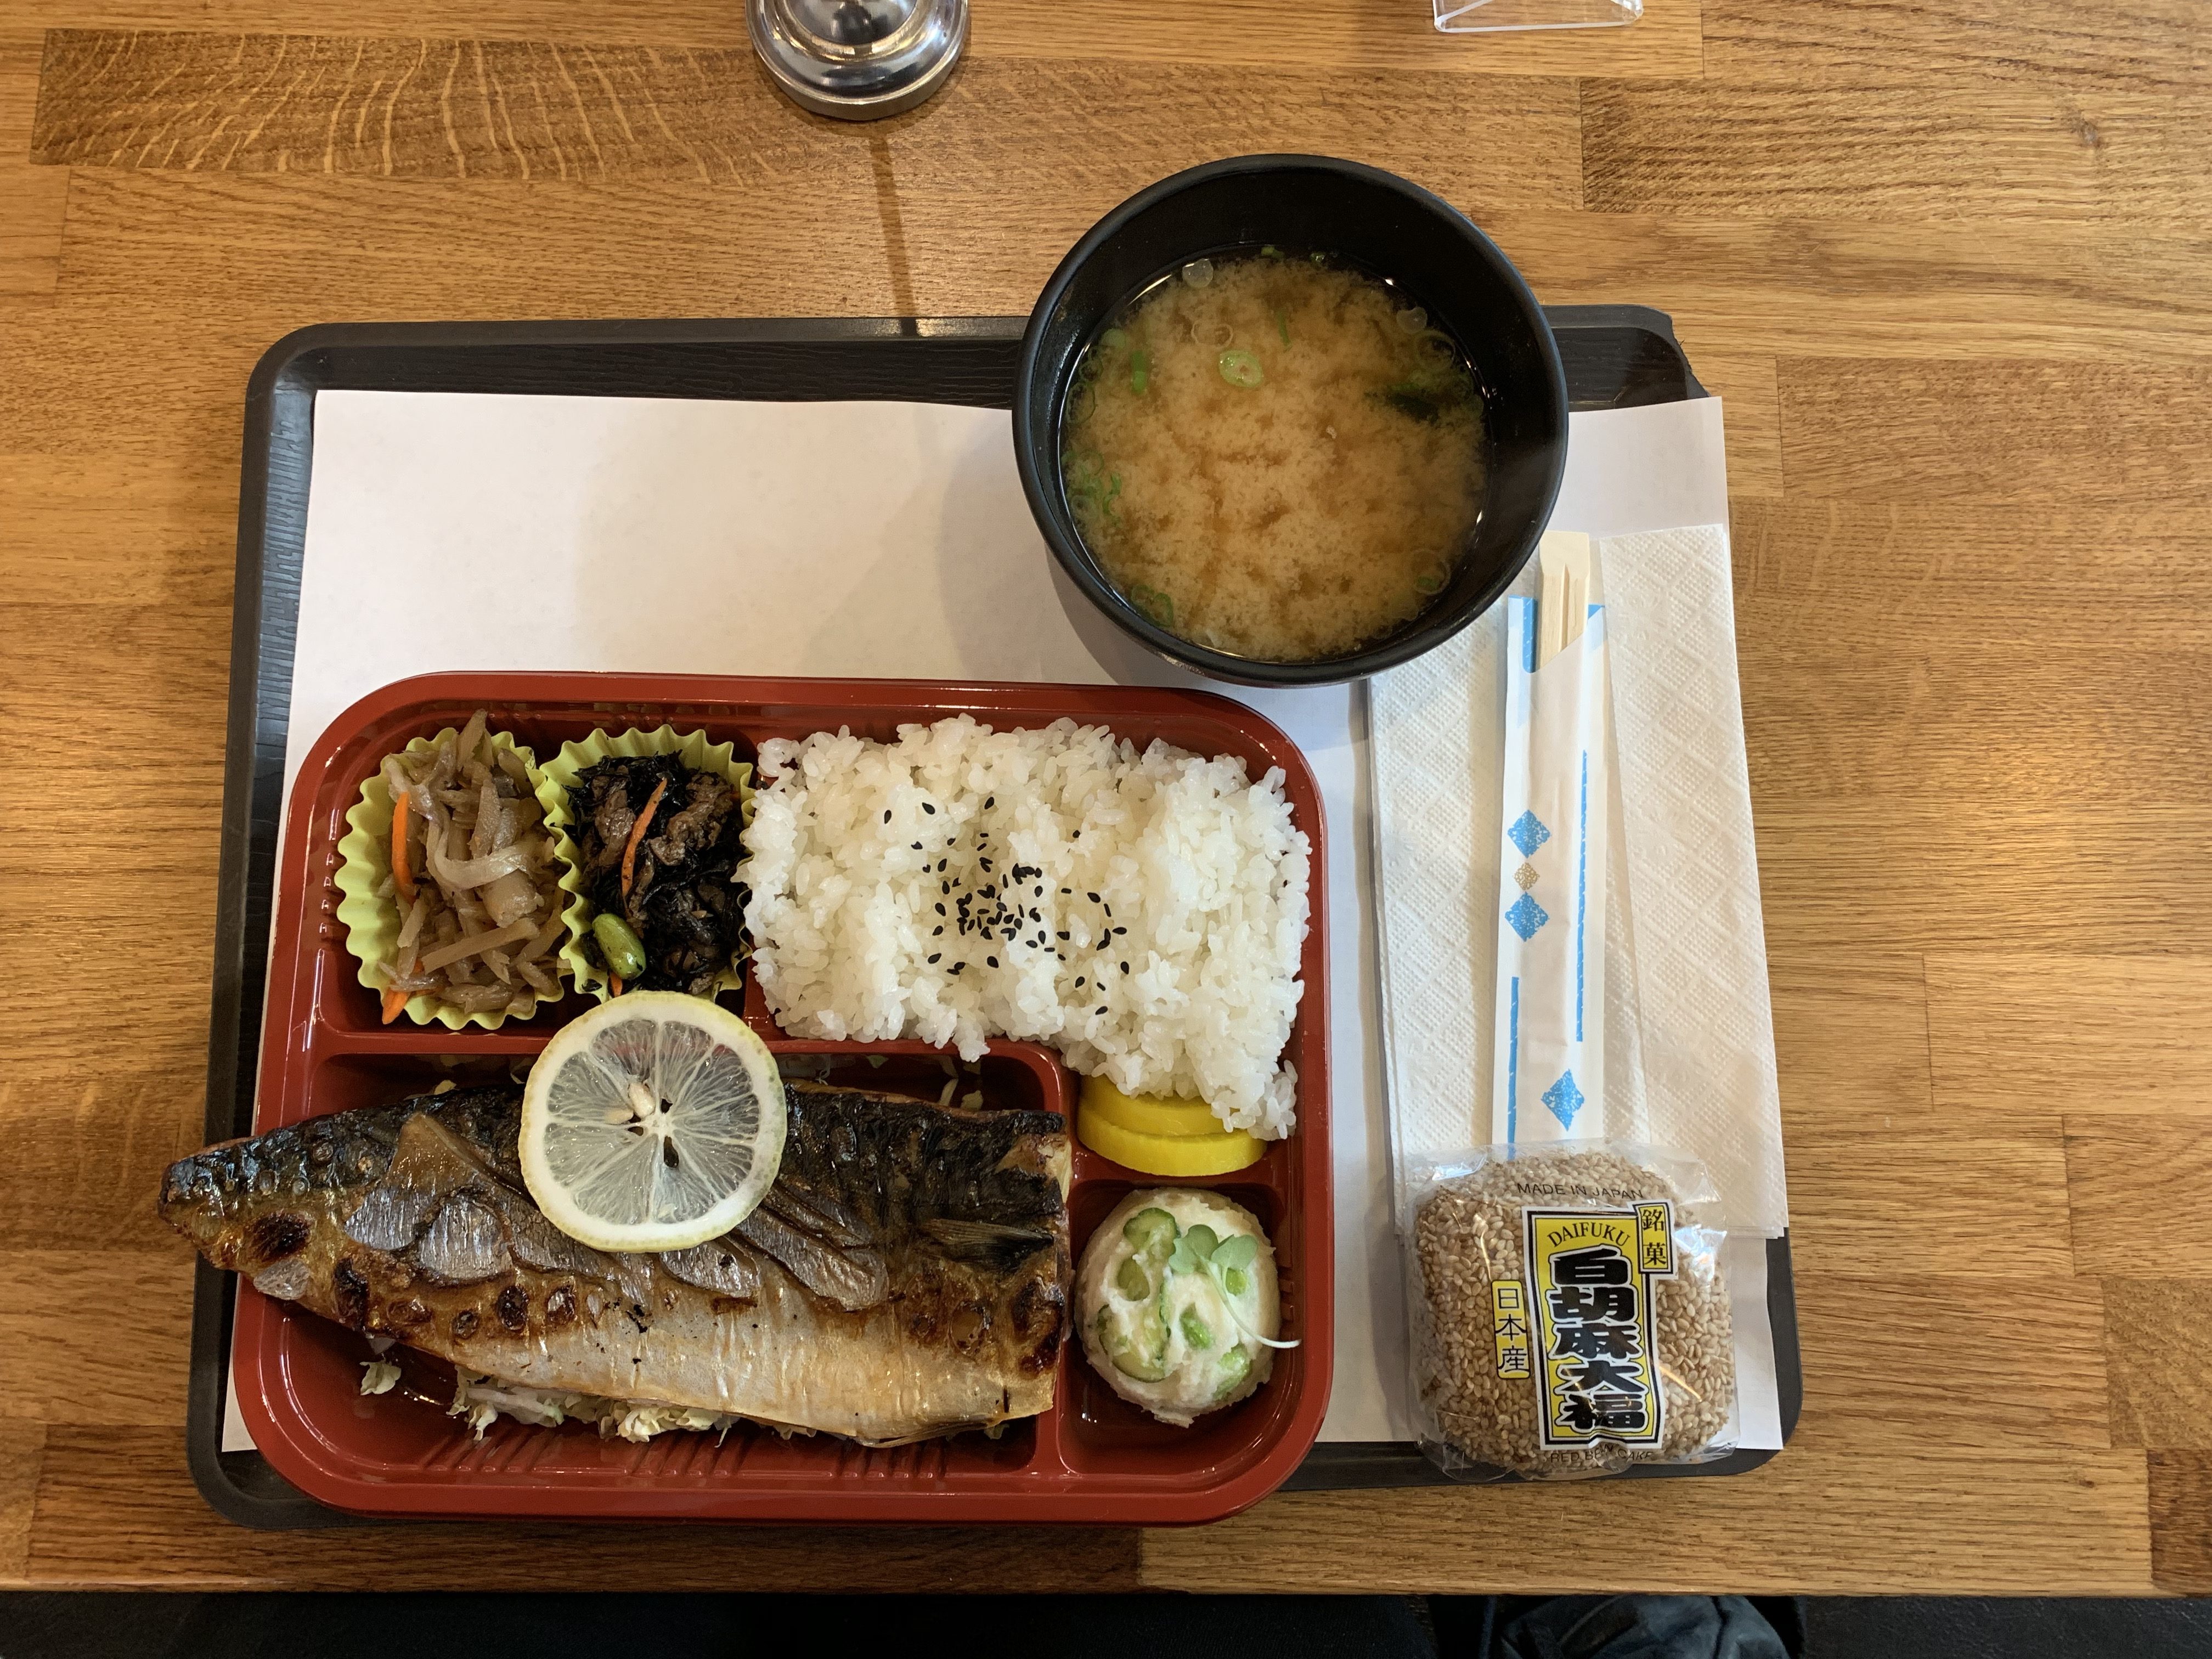 2019 Oct. Lunch at “Delicatessen by Osawa” in Pasadena